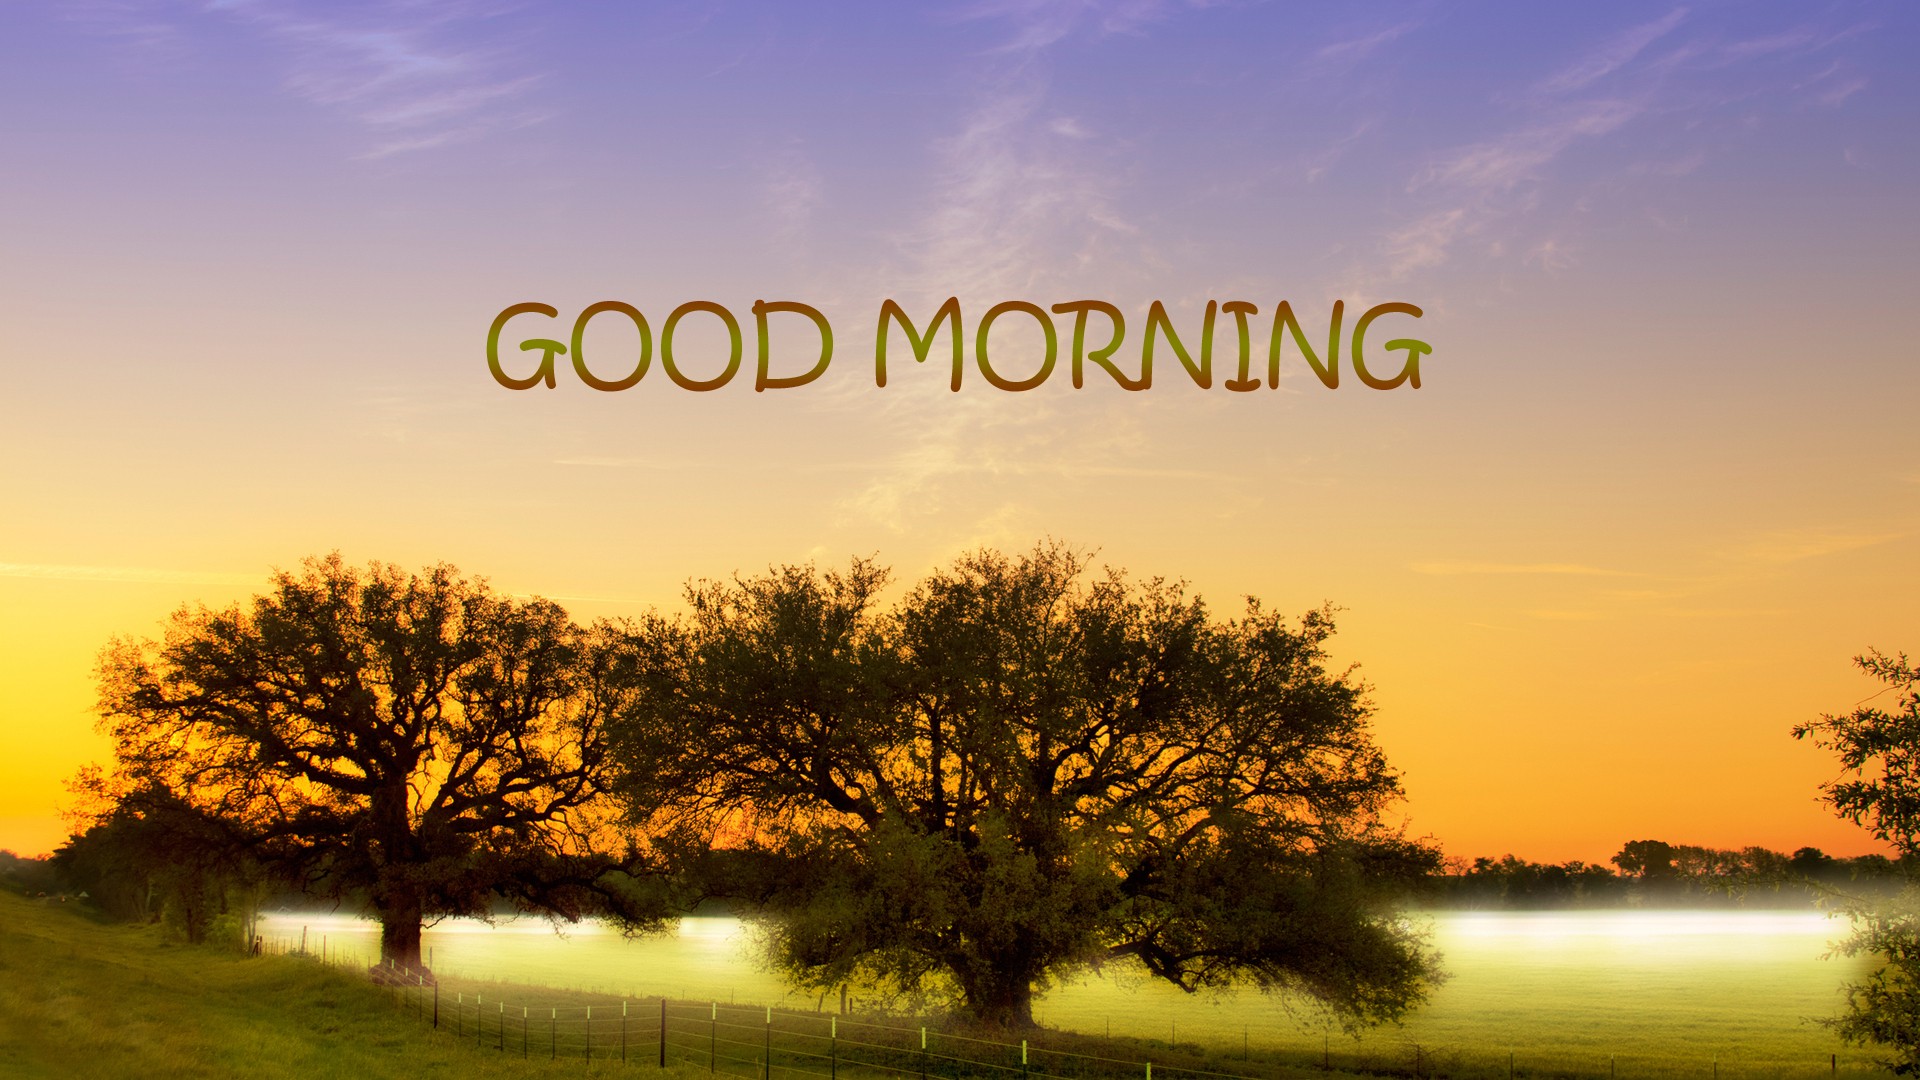 Good Morning HD Wallpaper Pictures